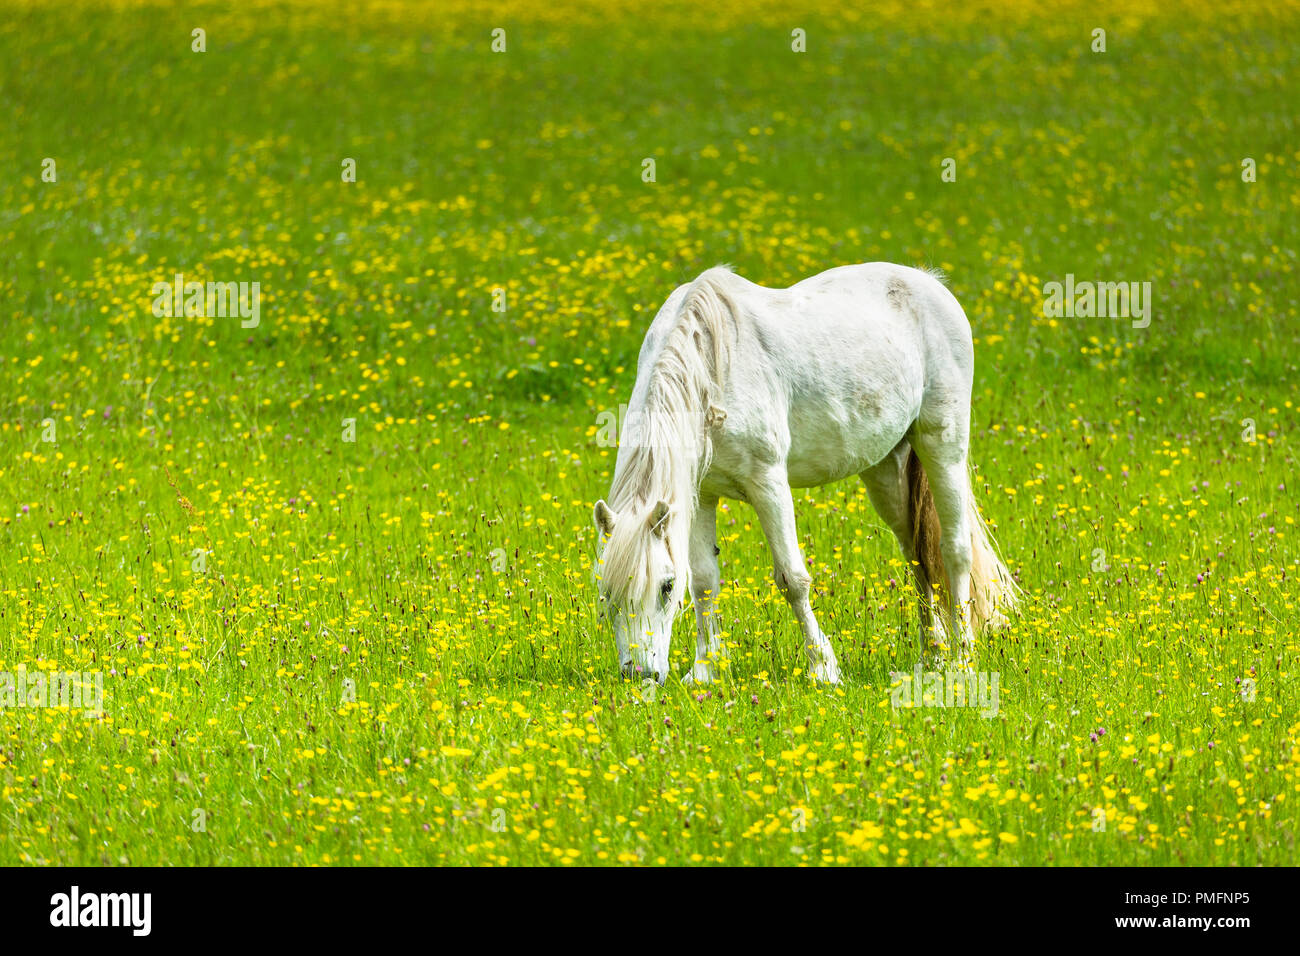 Horse grazing in a field of buttercups. Stock Photo